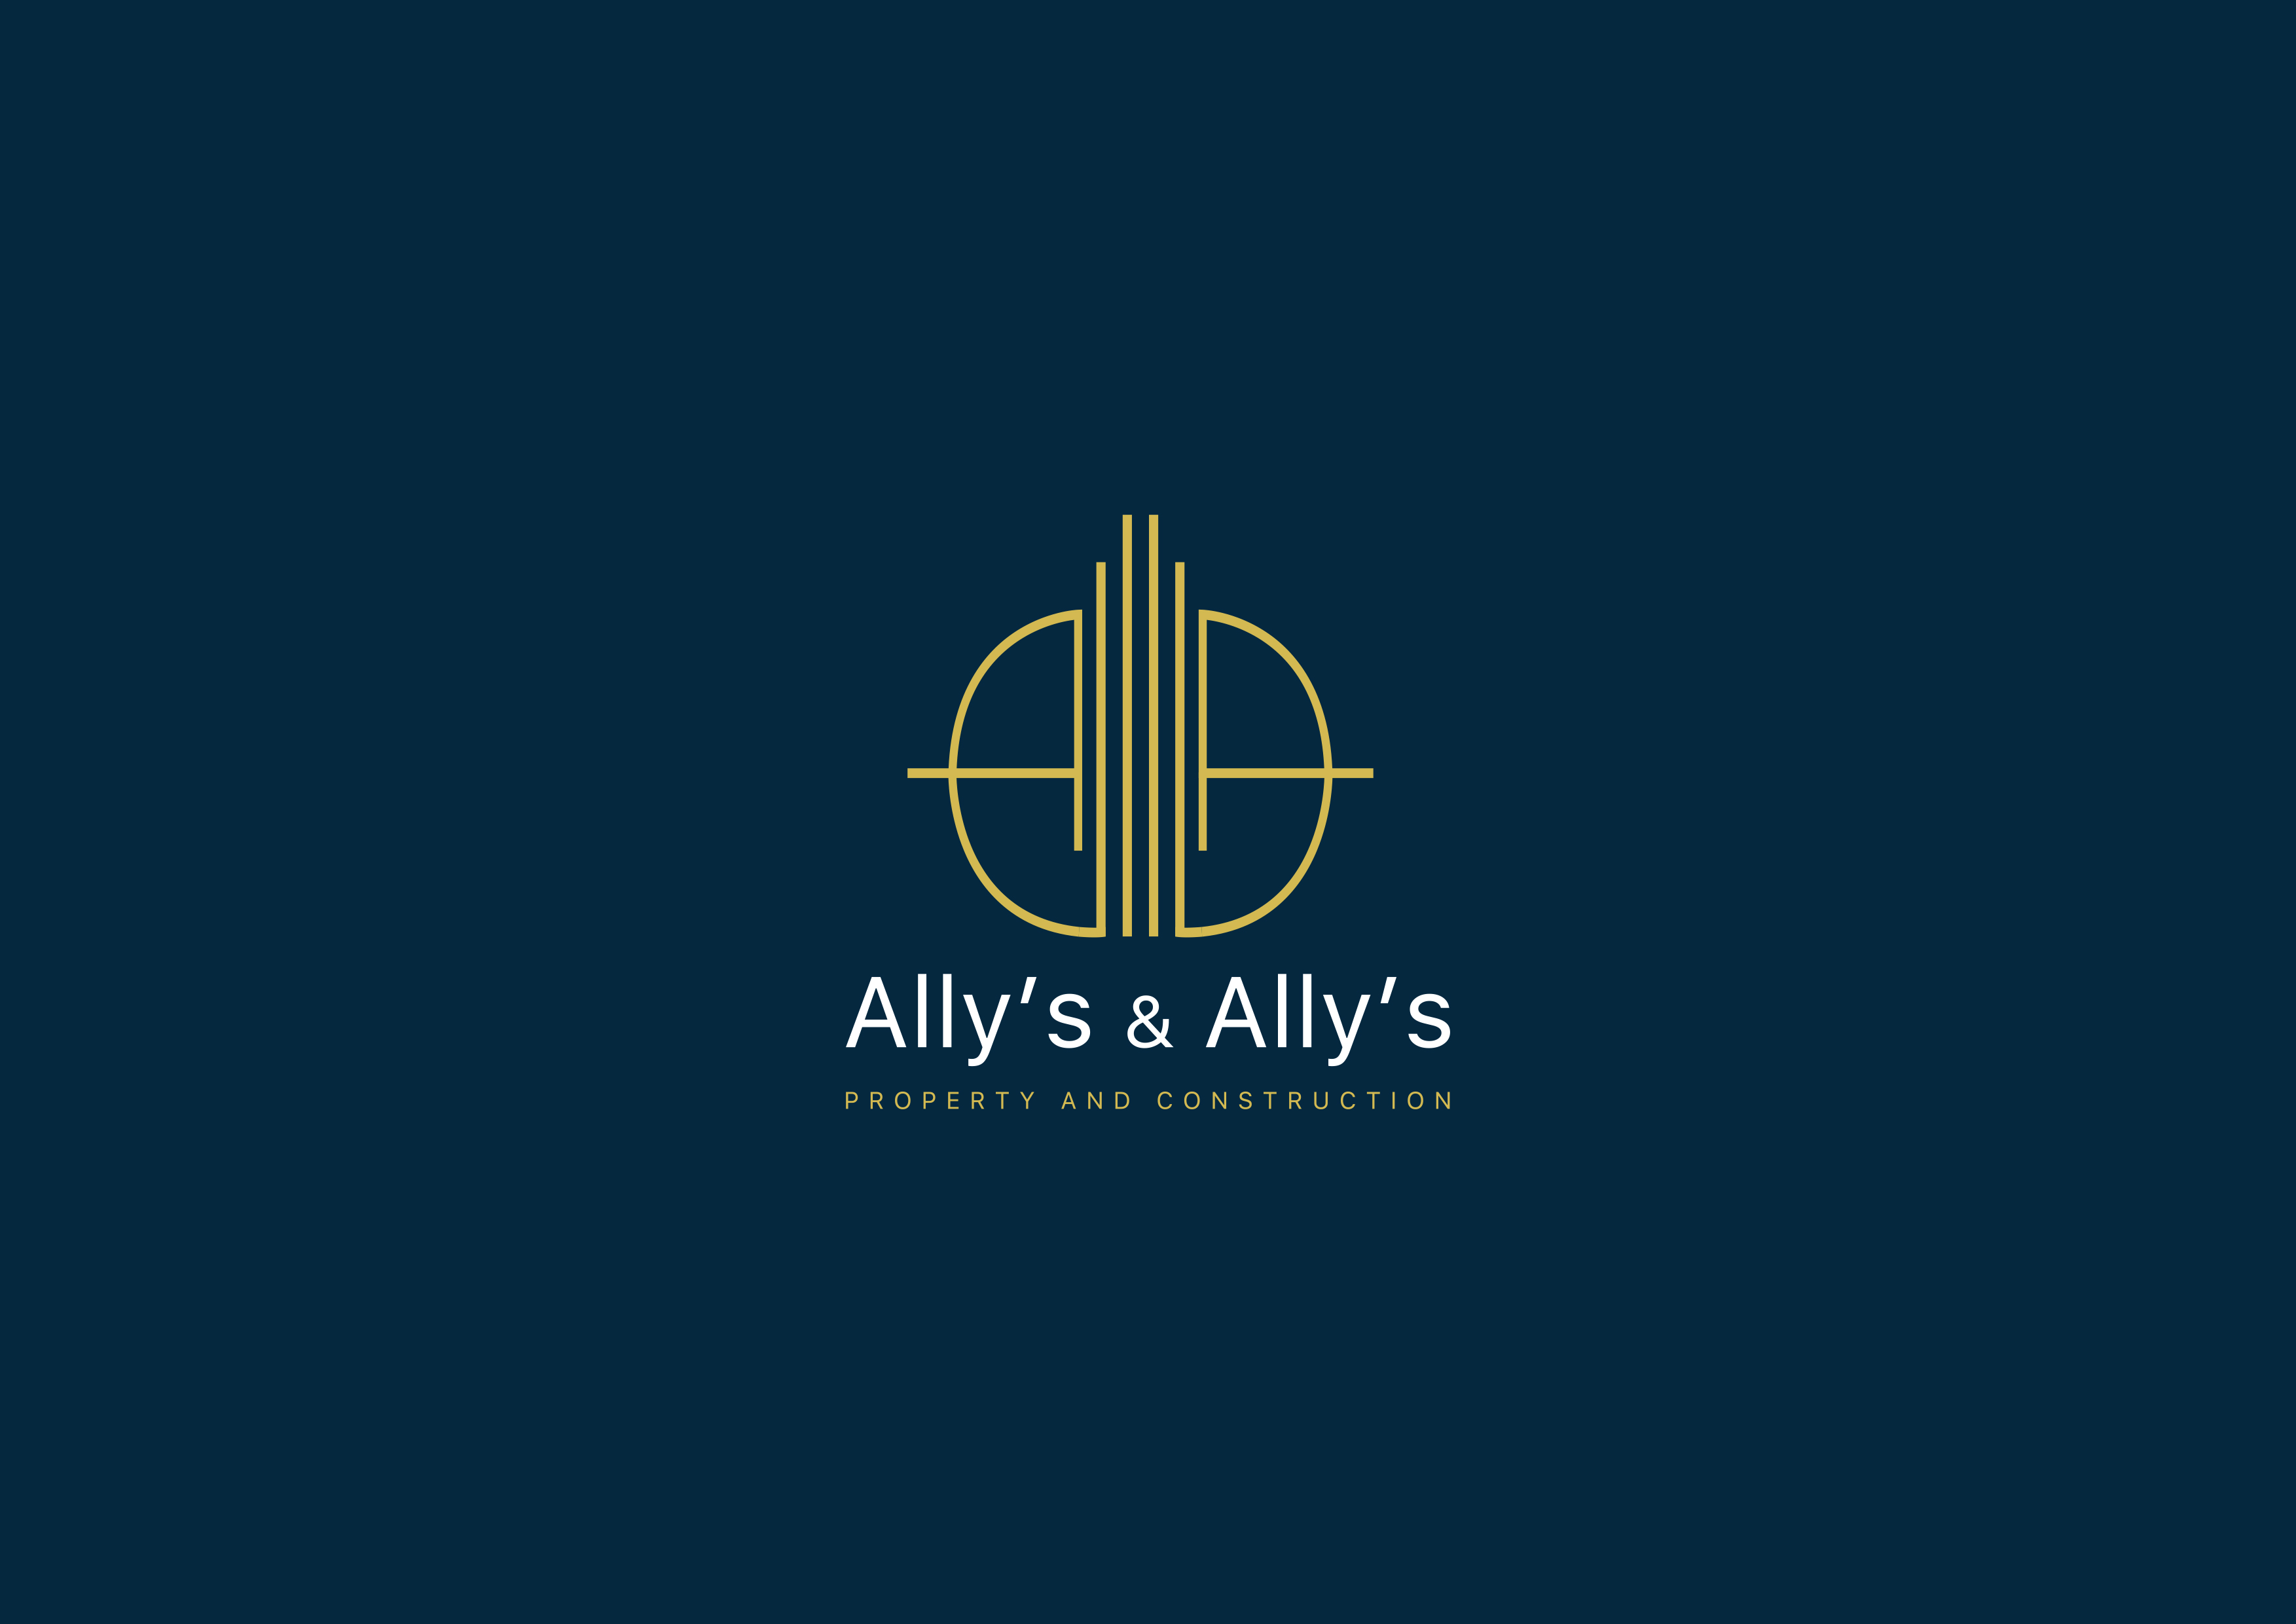 Ally_s and Ally_s Presentation-2